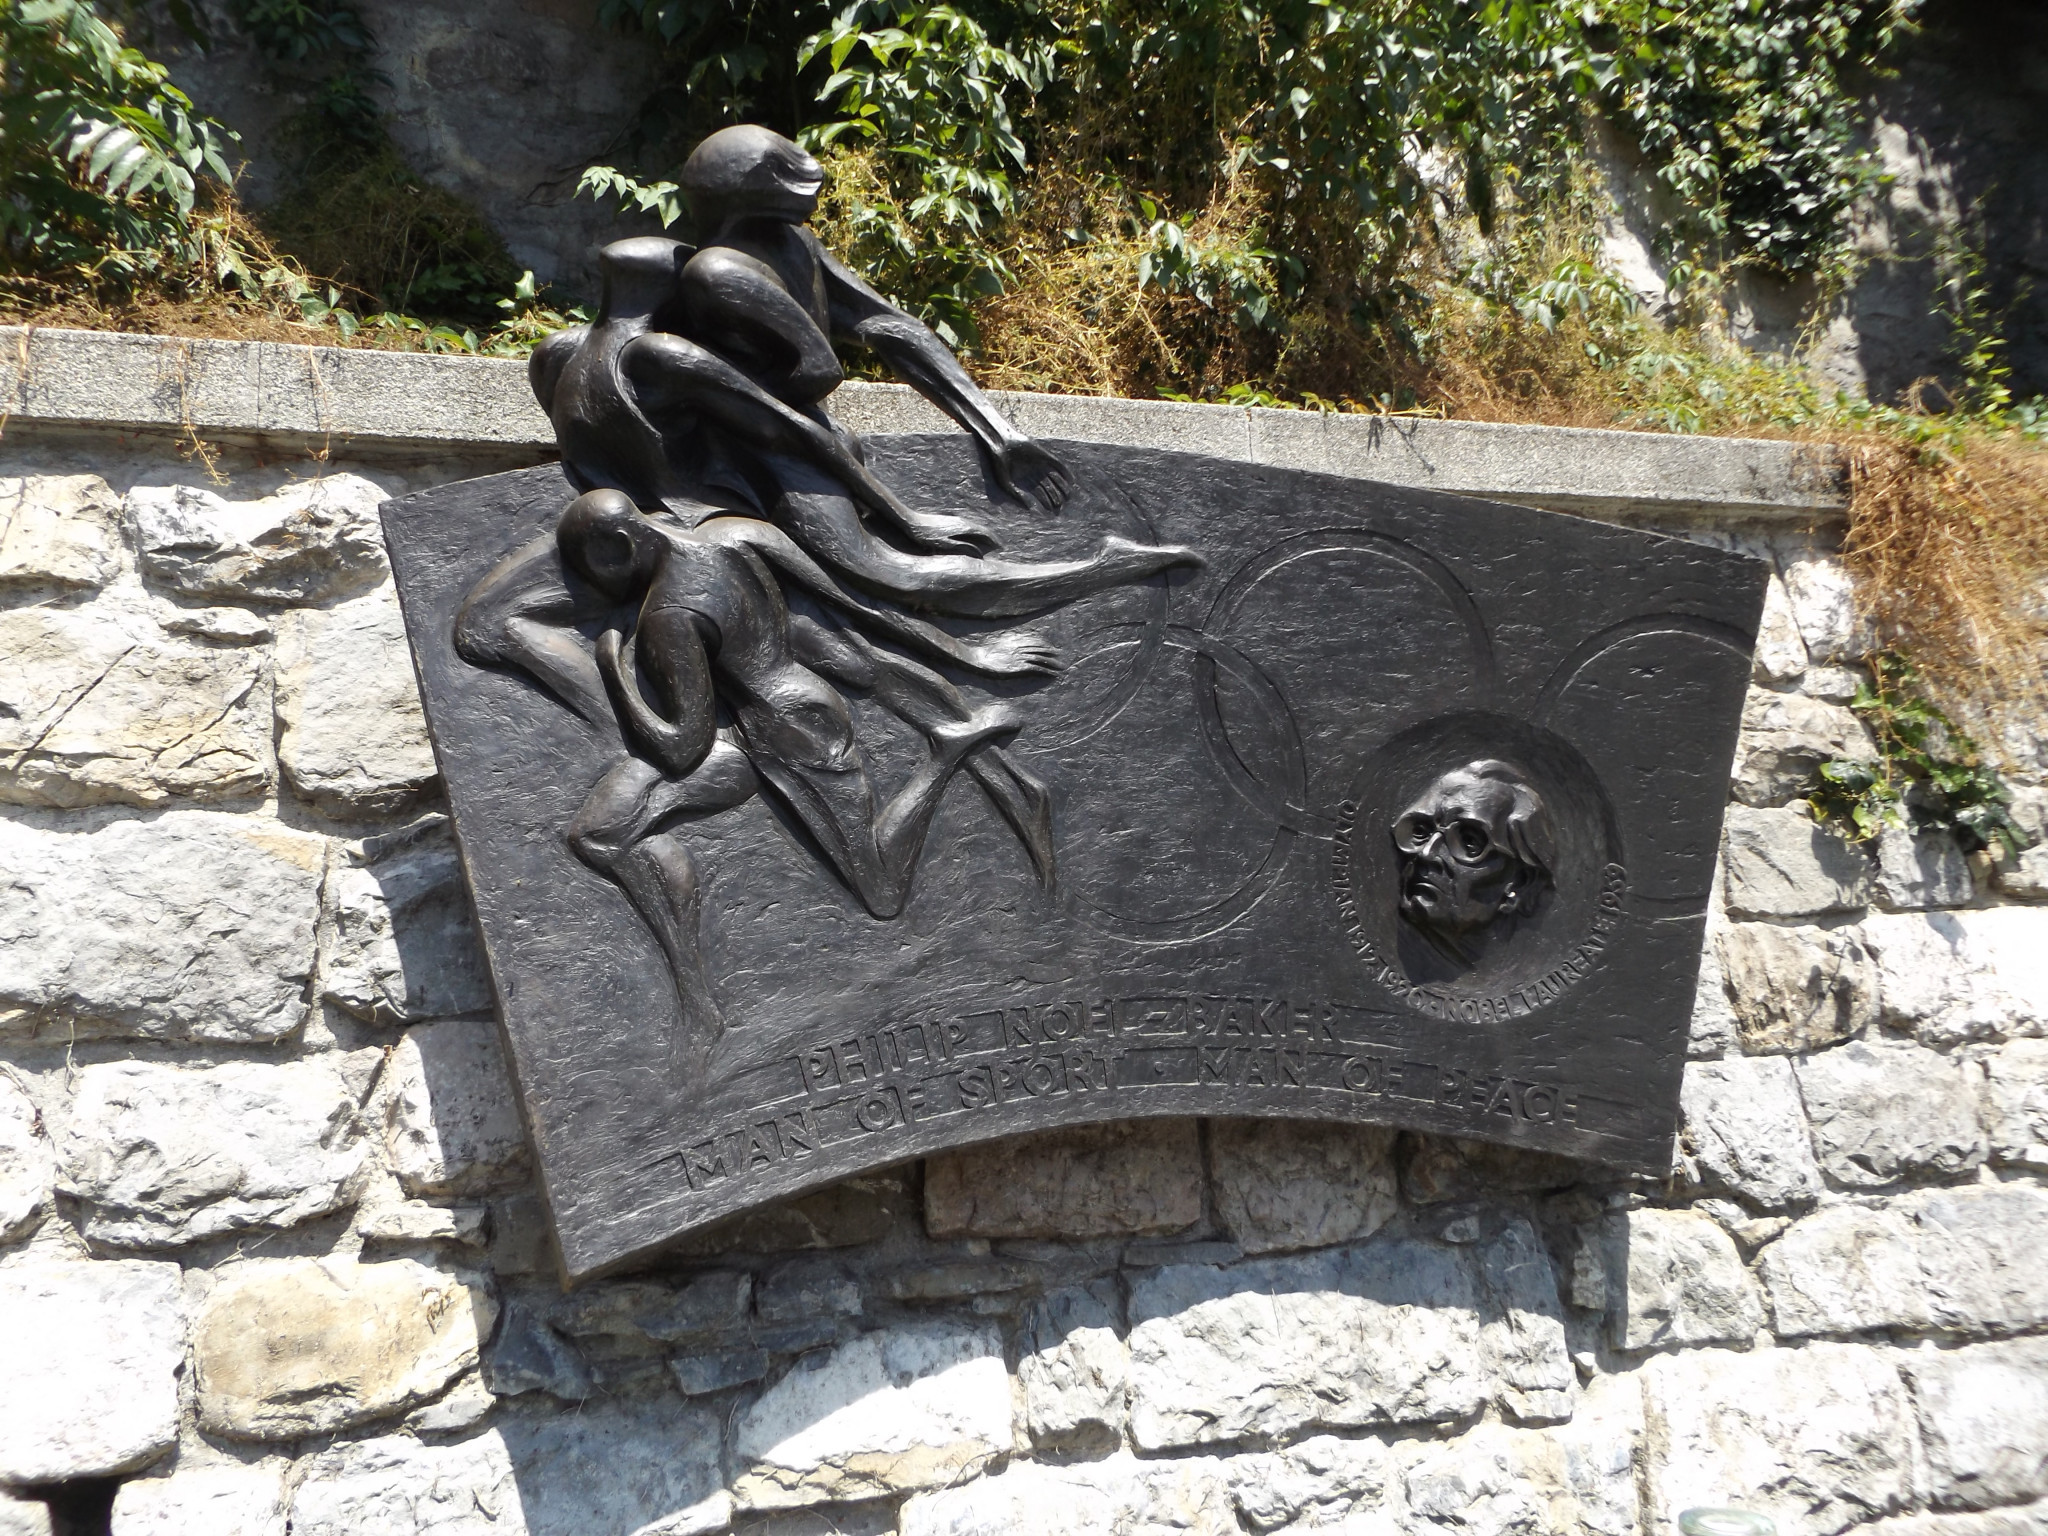 A plaque dedicated to Philip Noel-Baker in Olympic capital Lausanne ©ITG